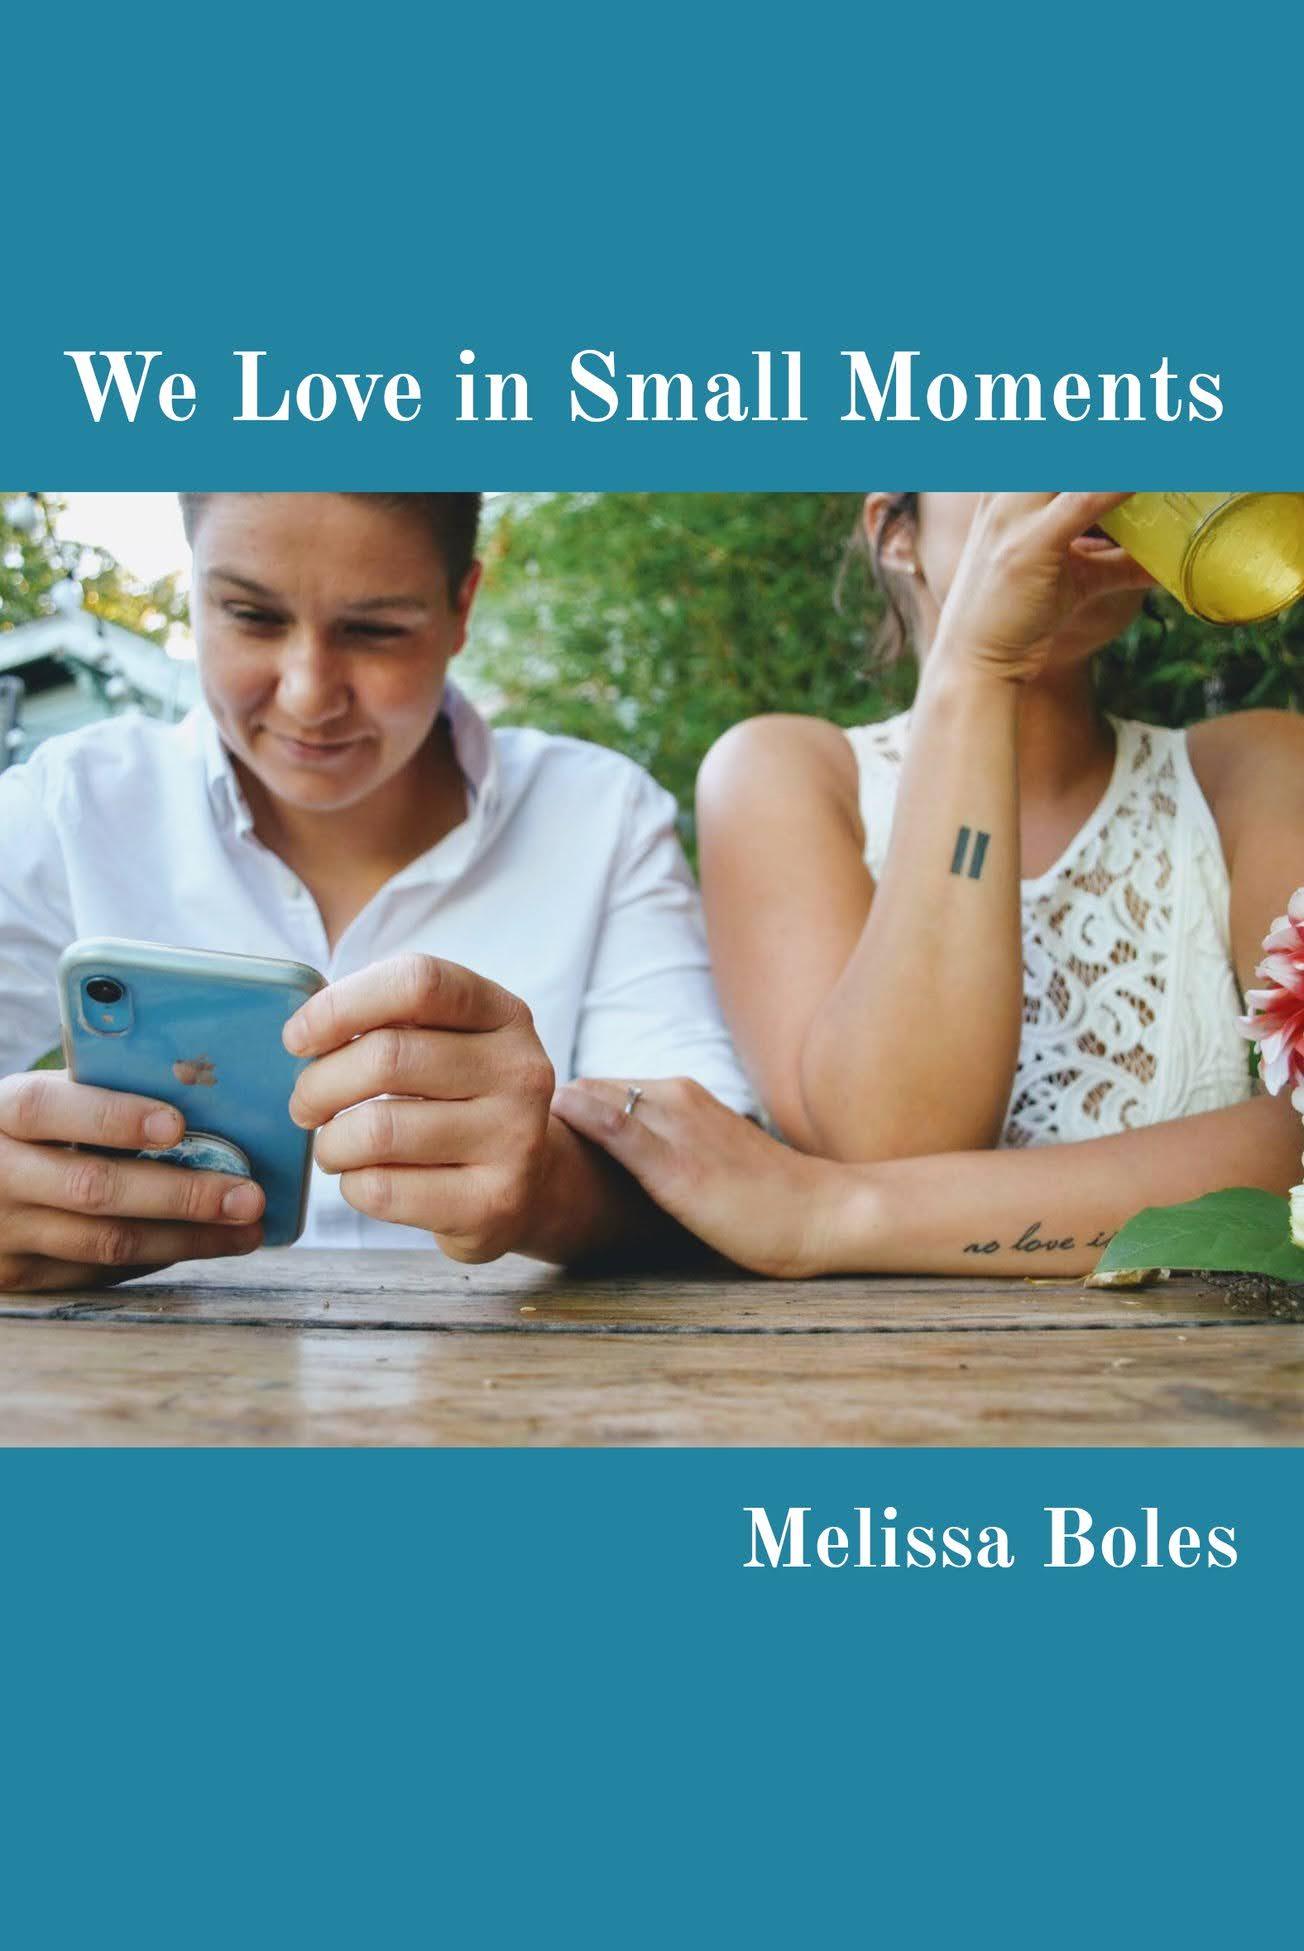 Book cover of We Love in Small Moments by Melissa Boles